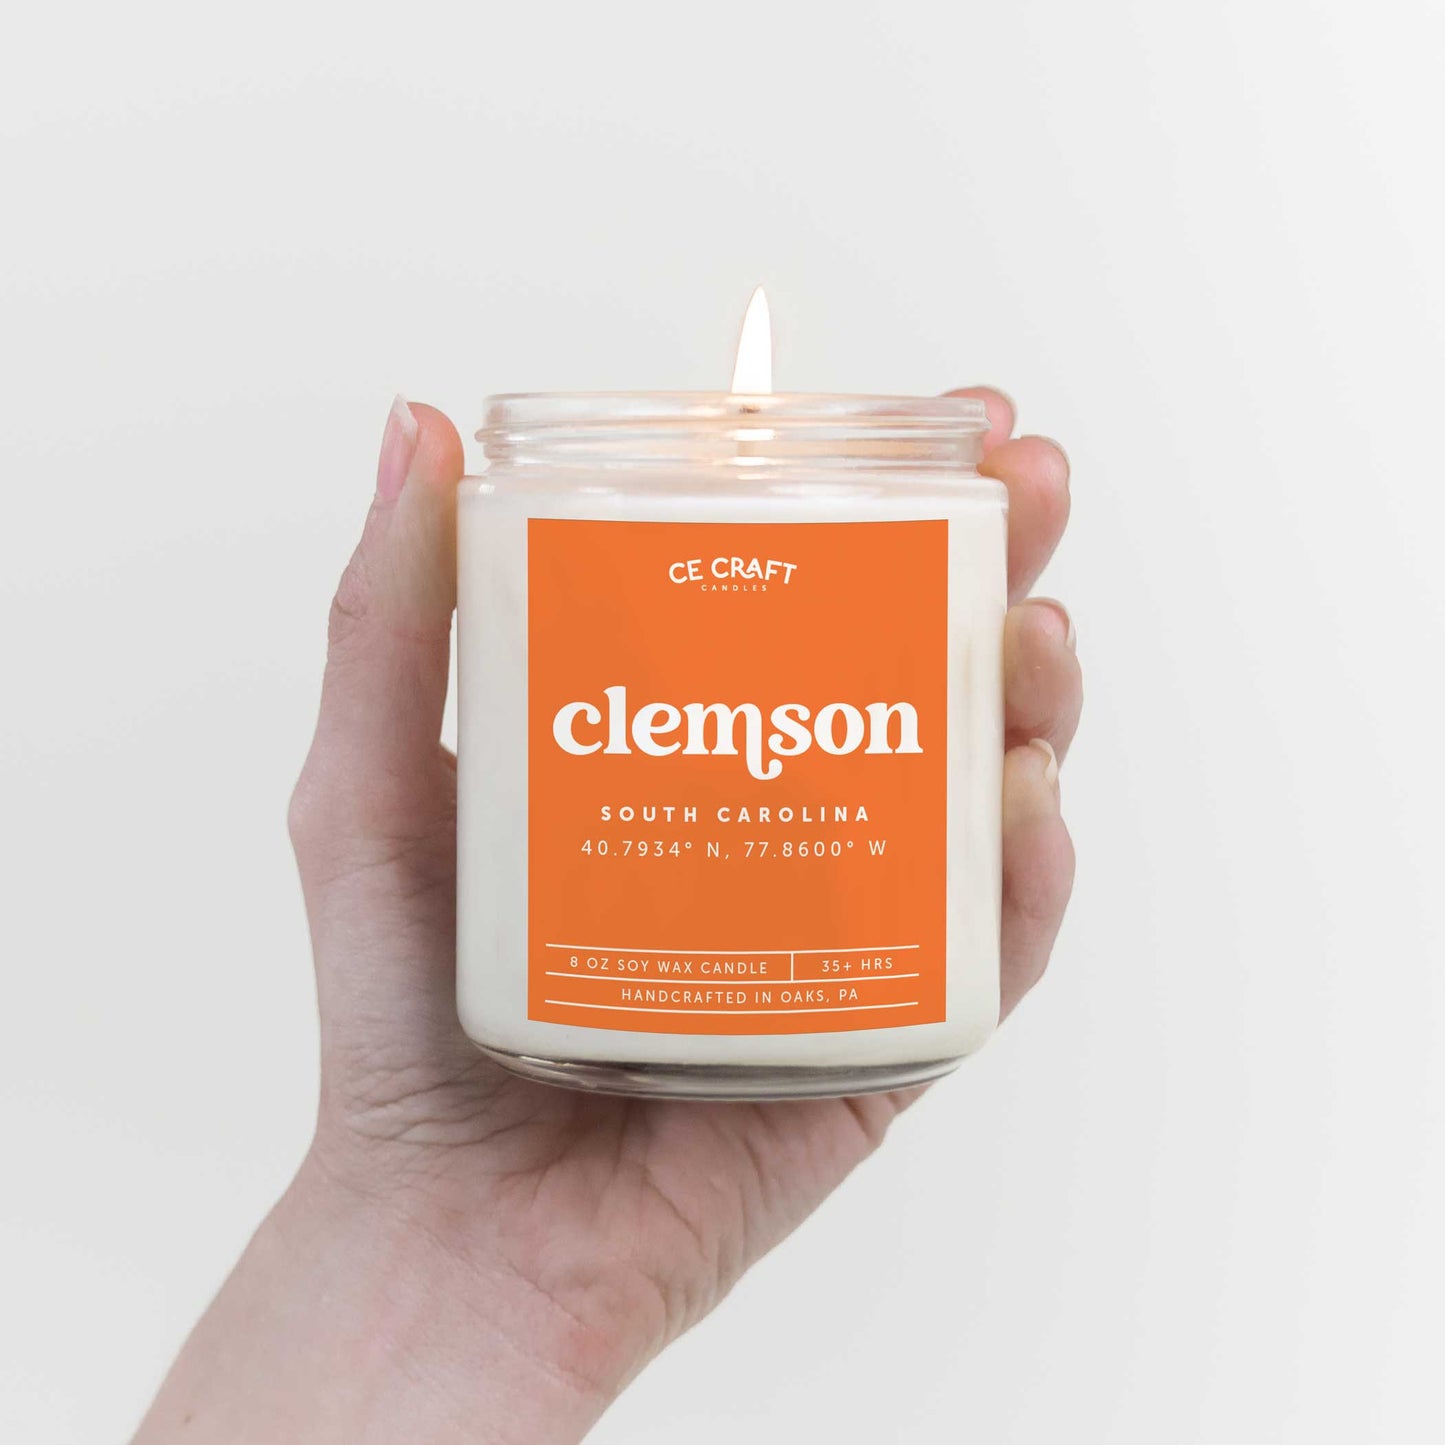 Clemson Scented Candle Candles CE Craft 